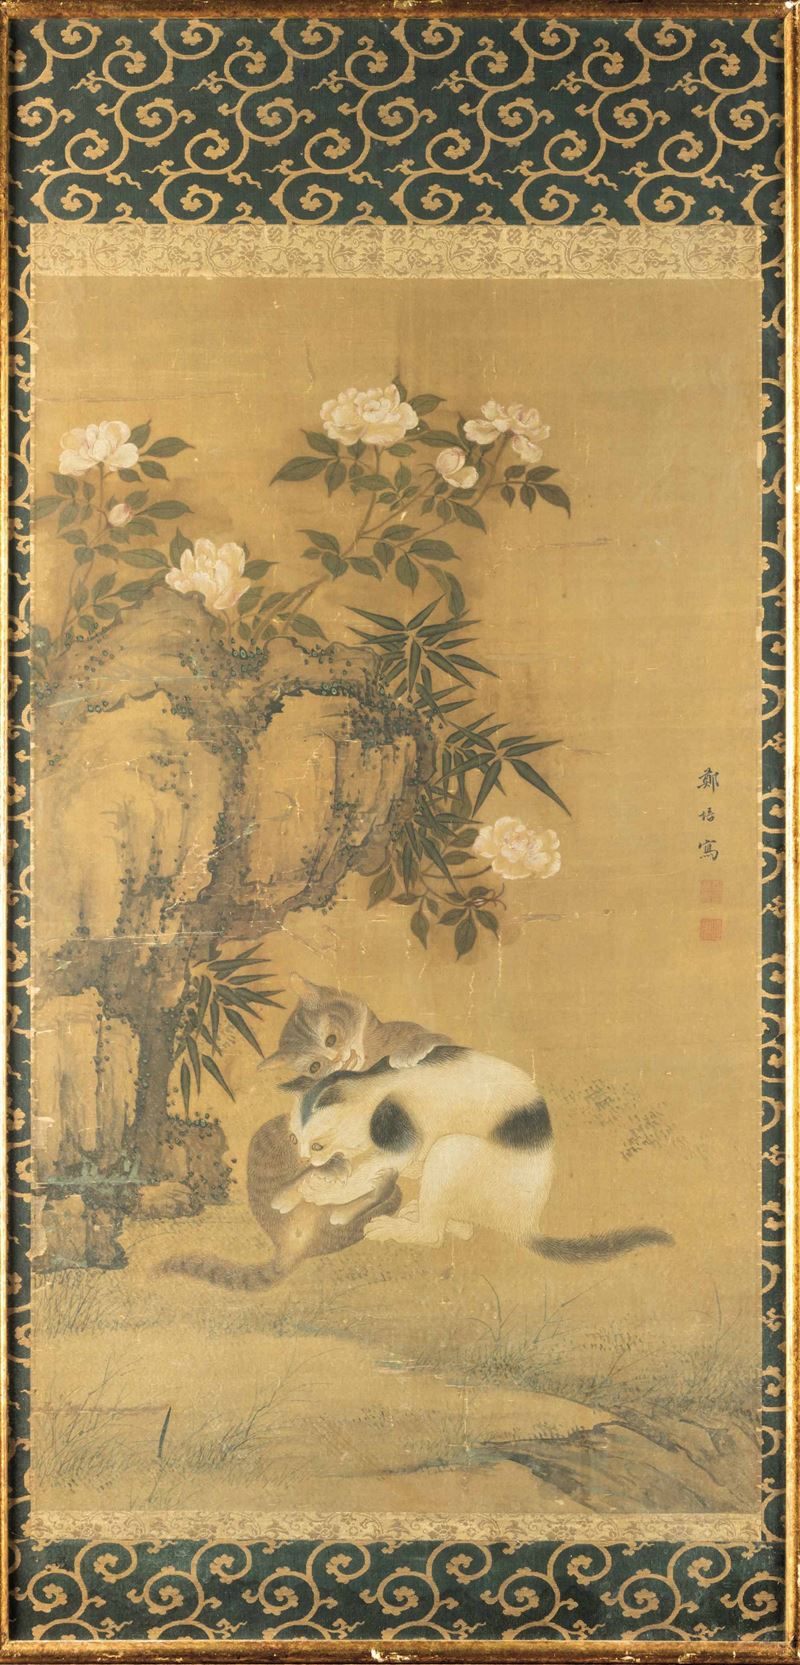 A painting of kittens on paper, China, 1800s  - Auction Fine Chinese Works of Art - Cambi Casa d'Aste